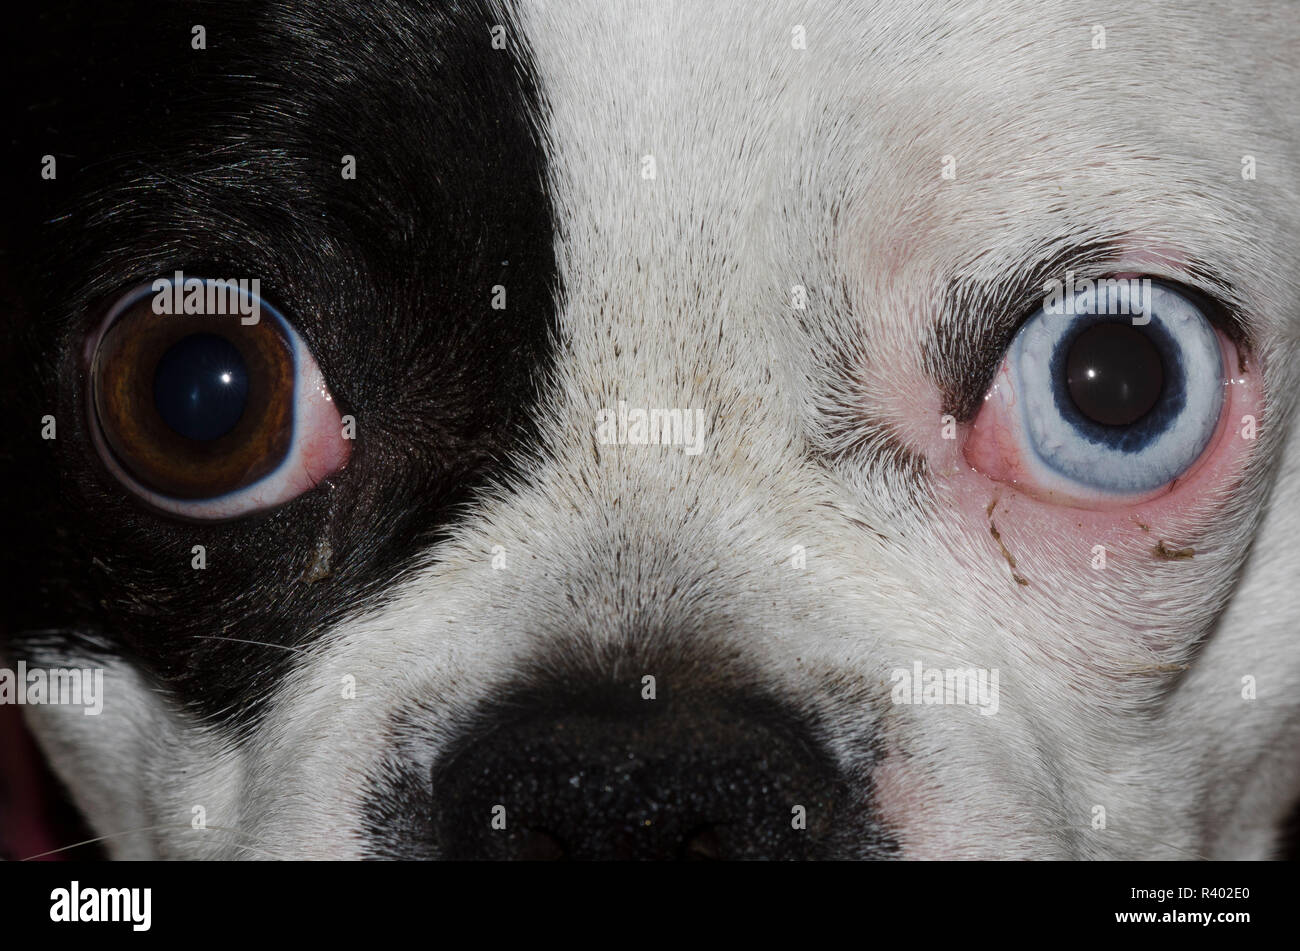 Boston Terrier, Canis lupus familiaris, eyes and face Stock Photo